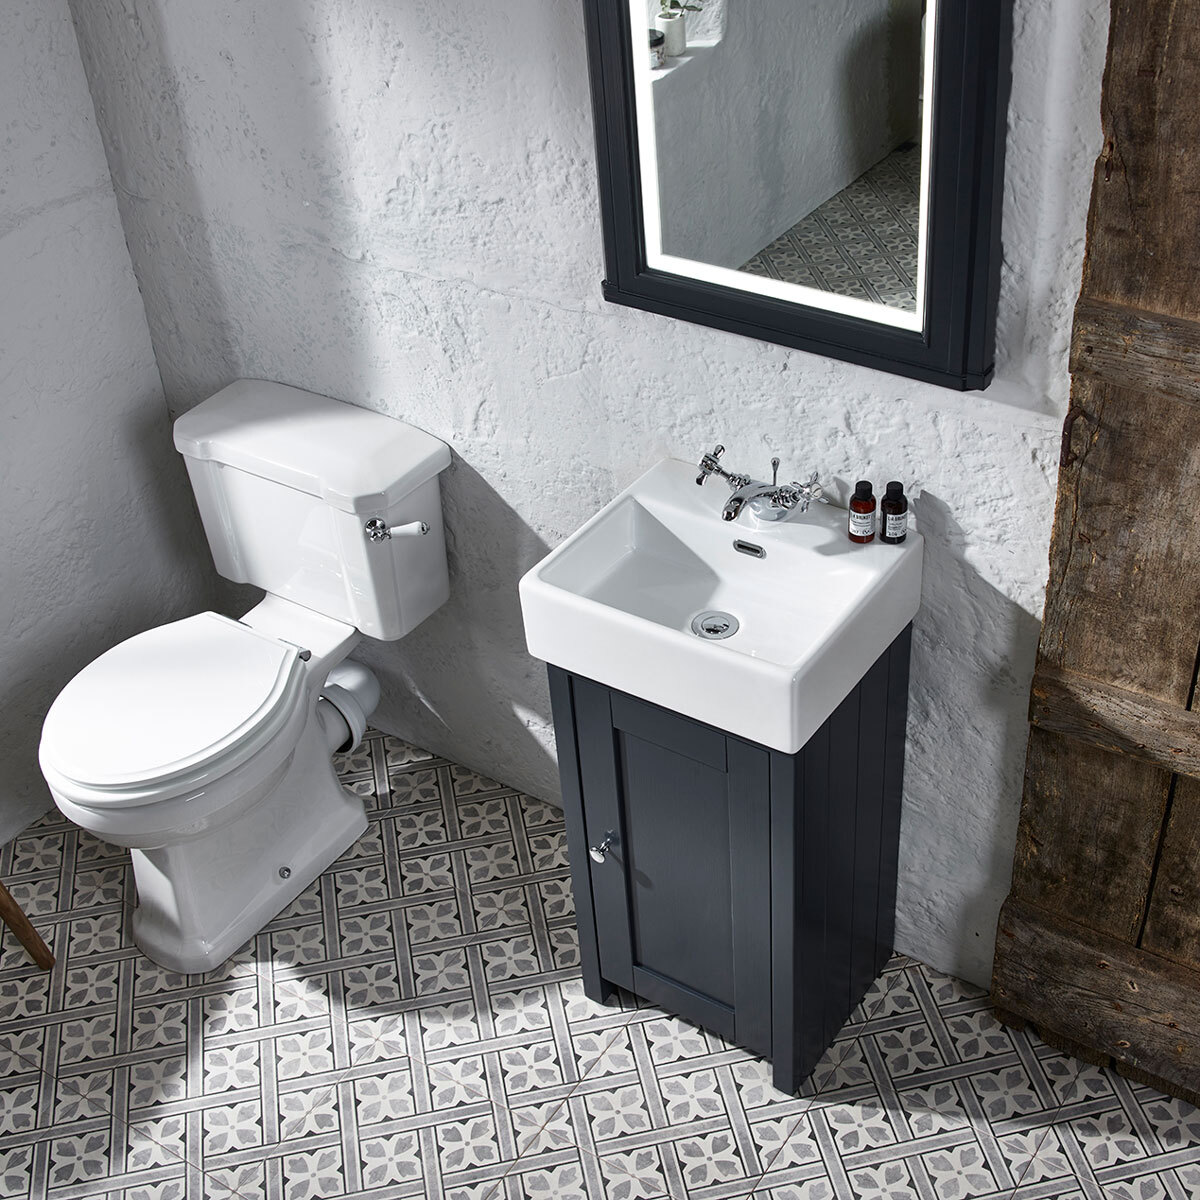 Lifestyle image of unit in bathroom setting